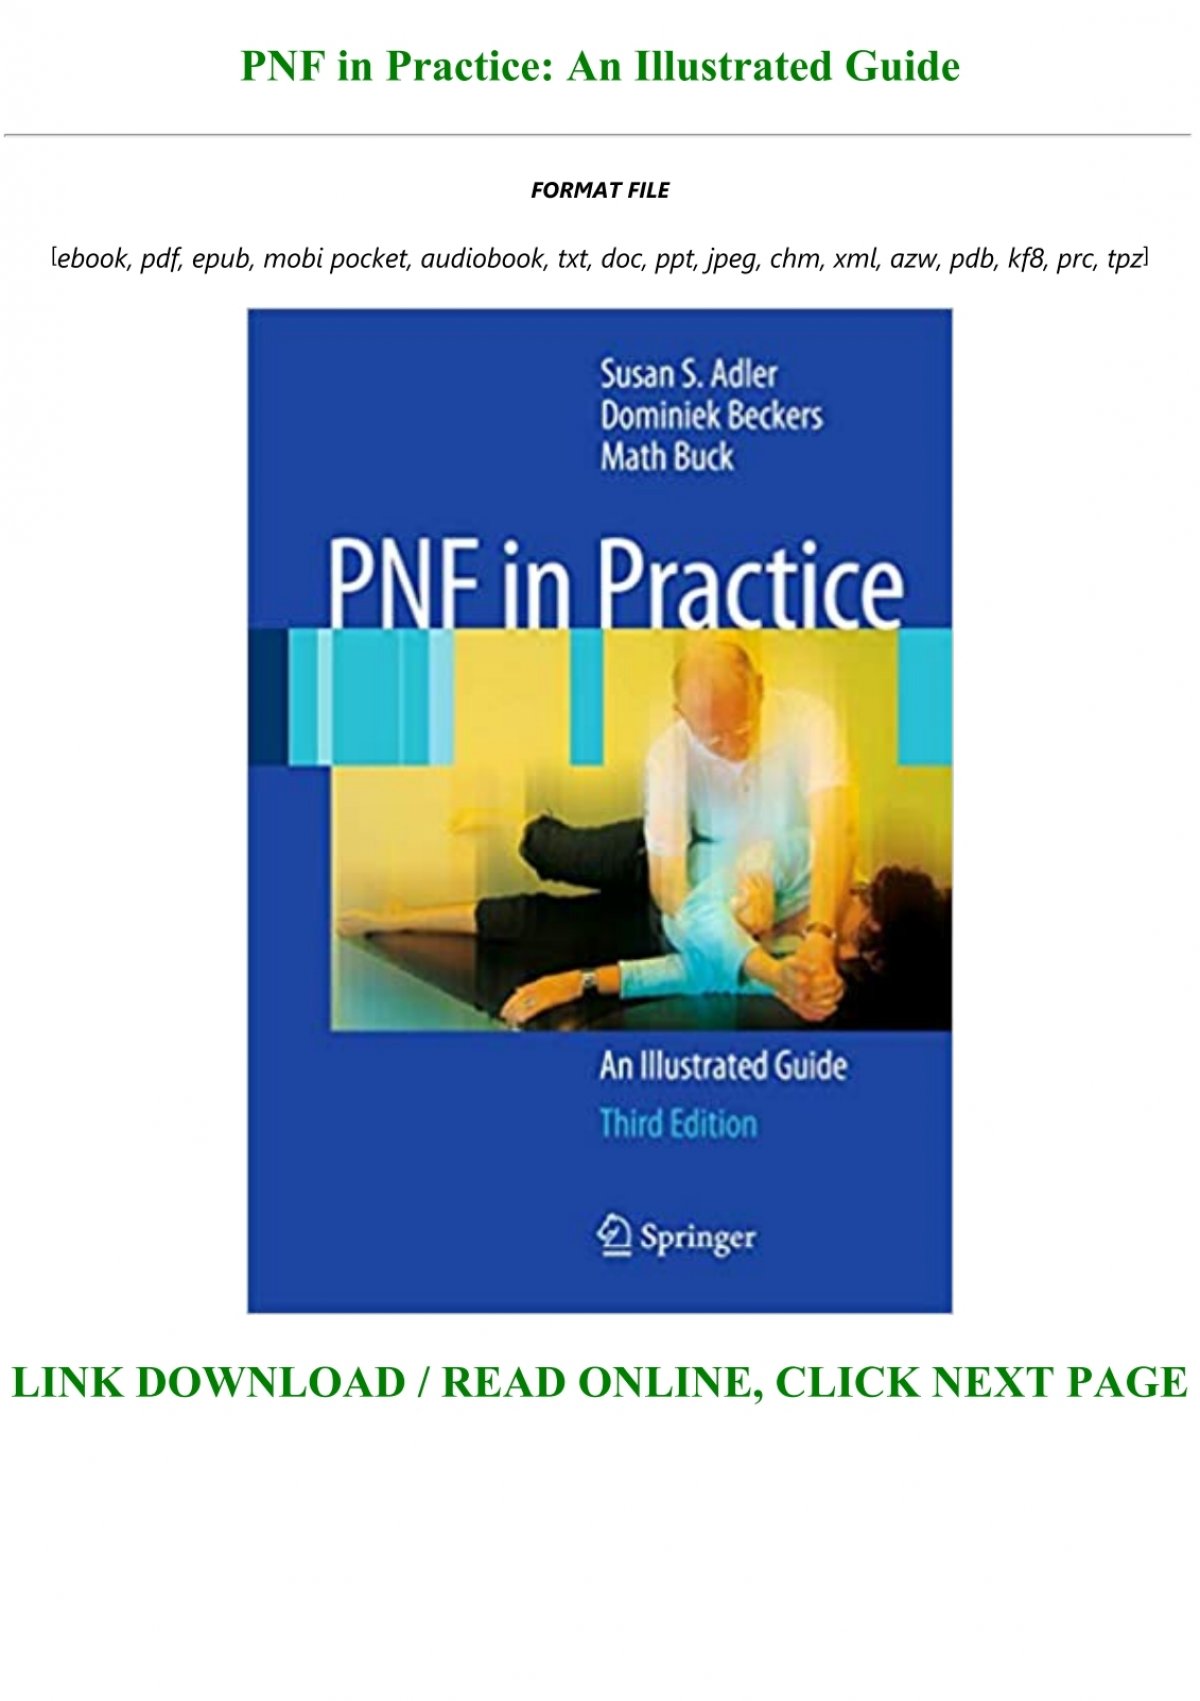 pnf in practice an illustrated guide download